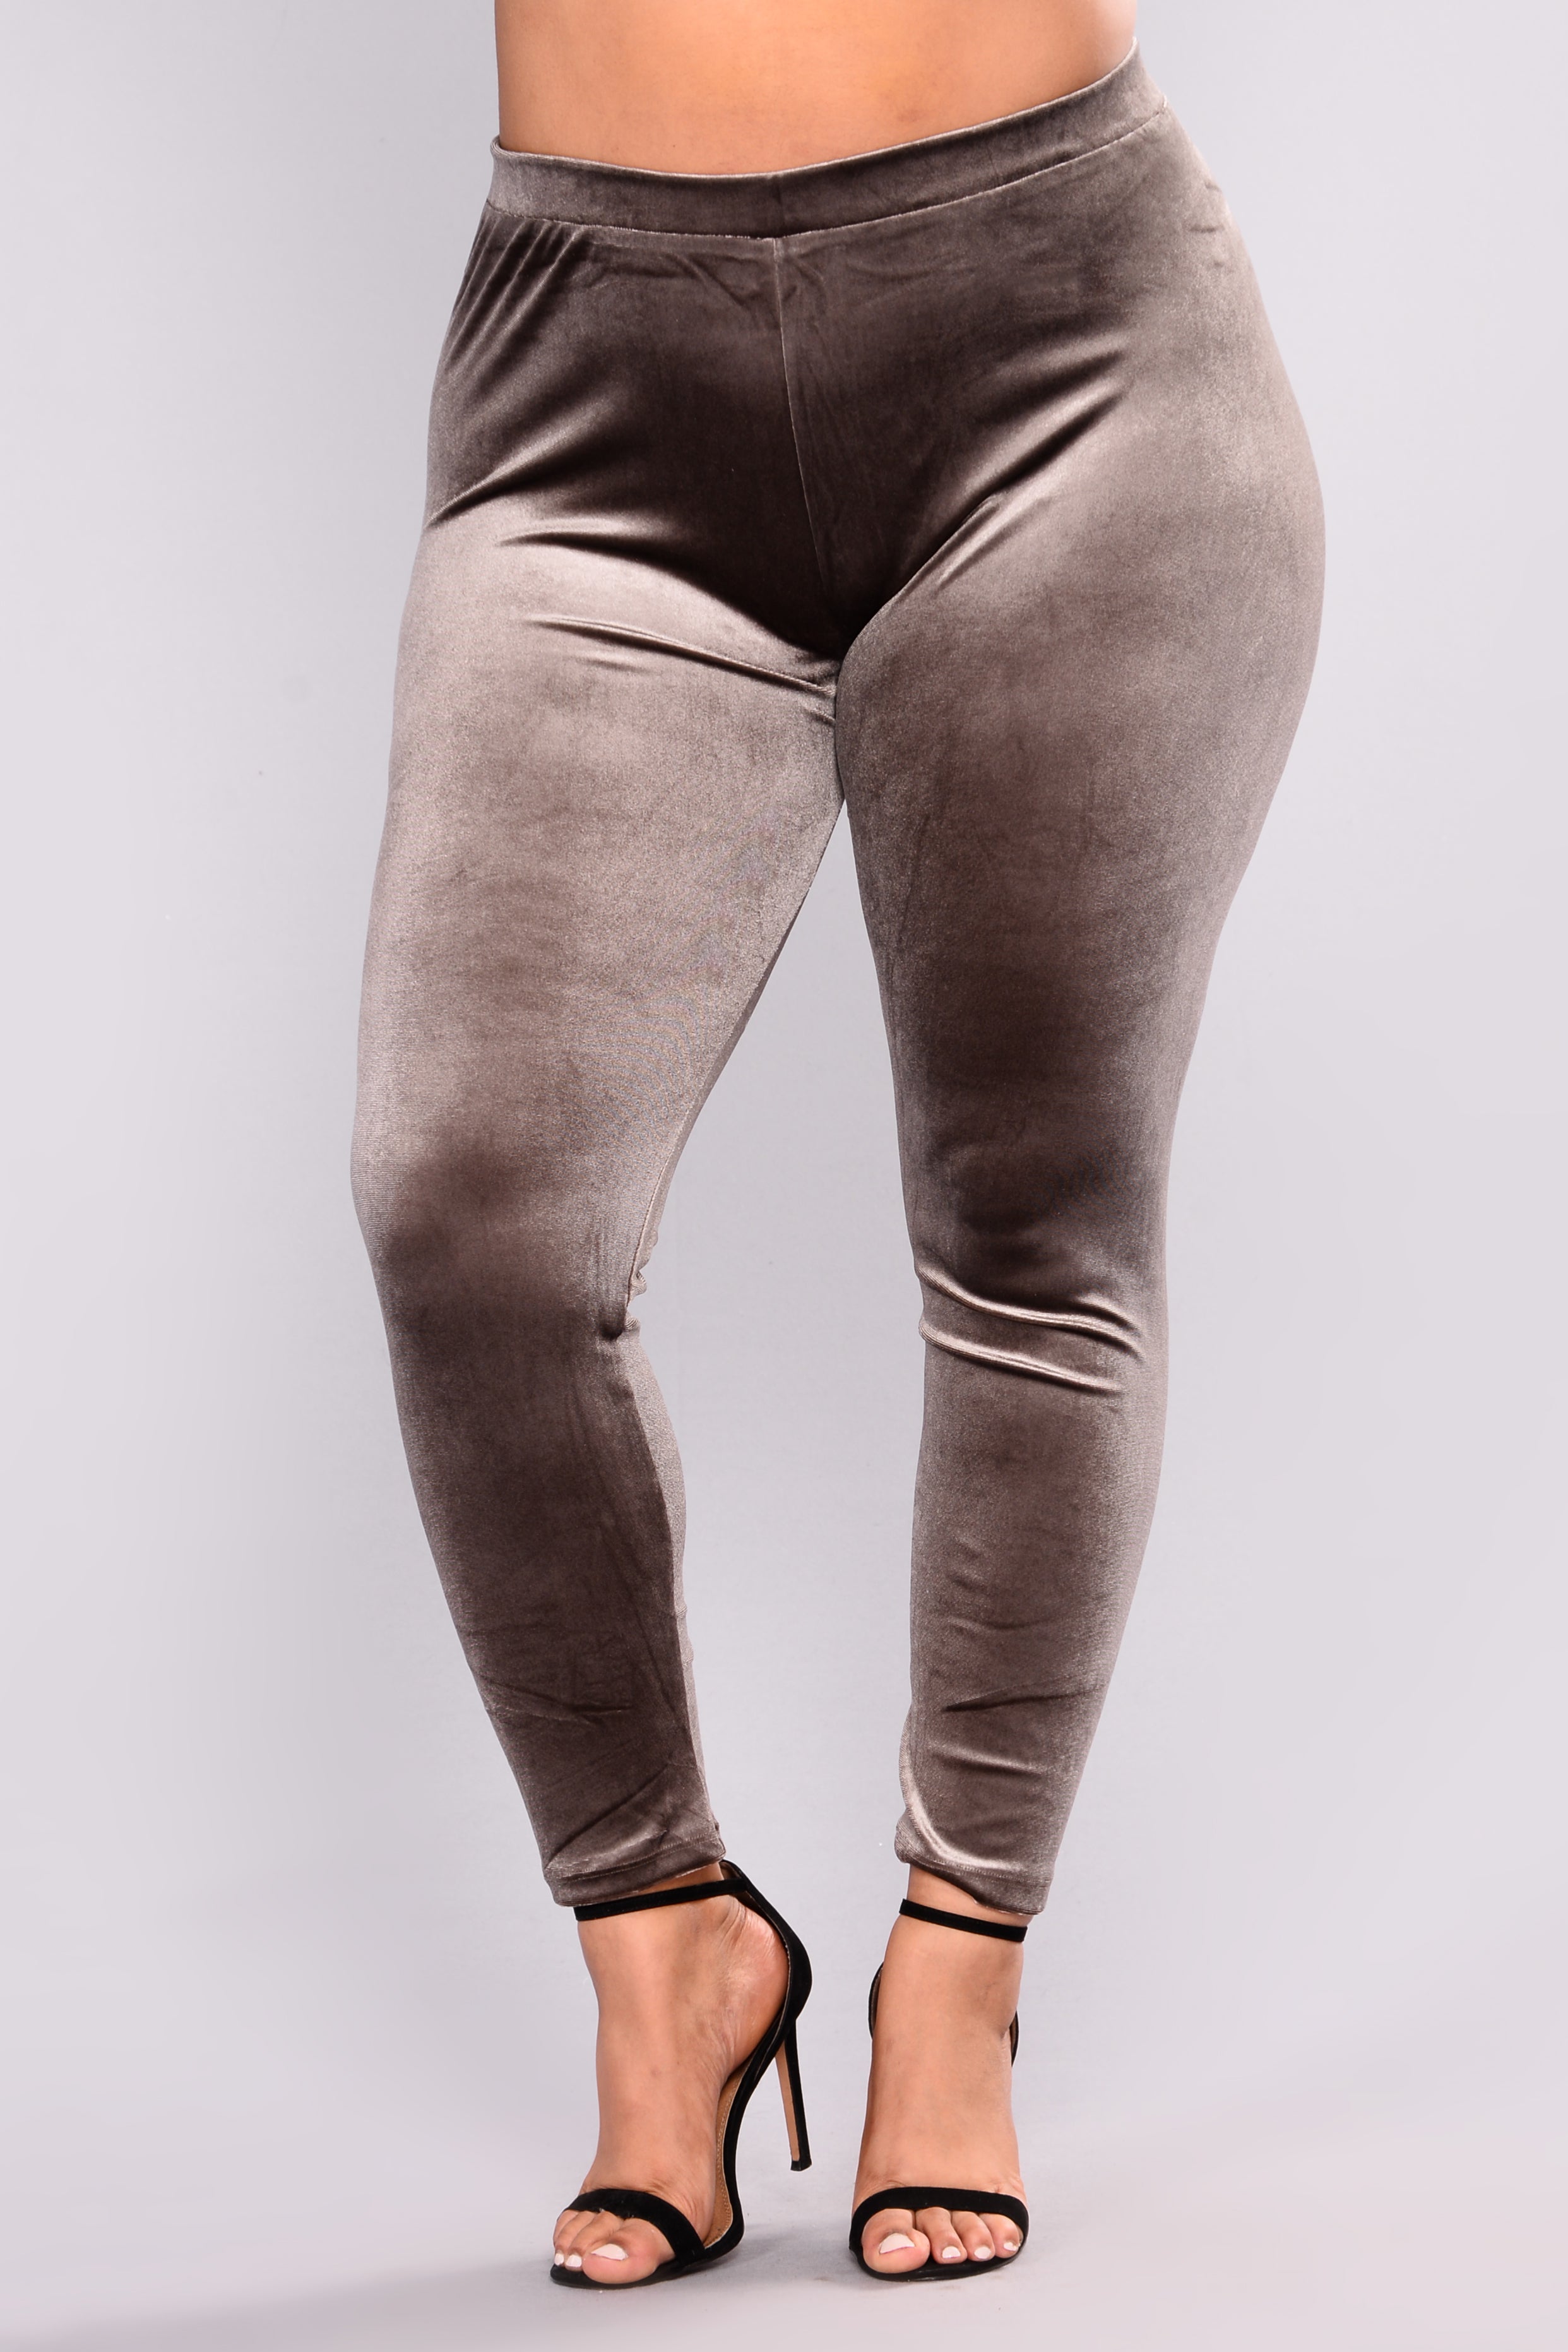 Look But Don't Touch Leggings - Grey